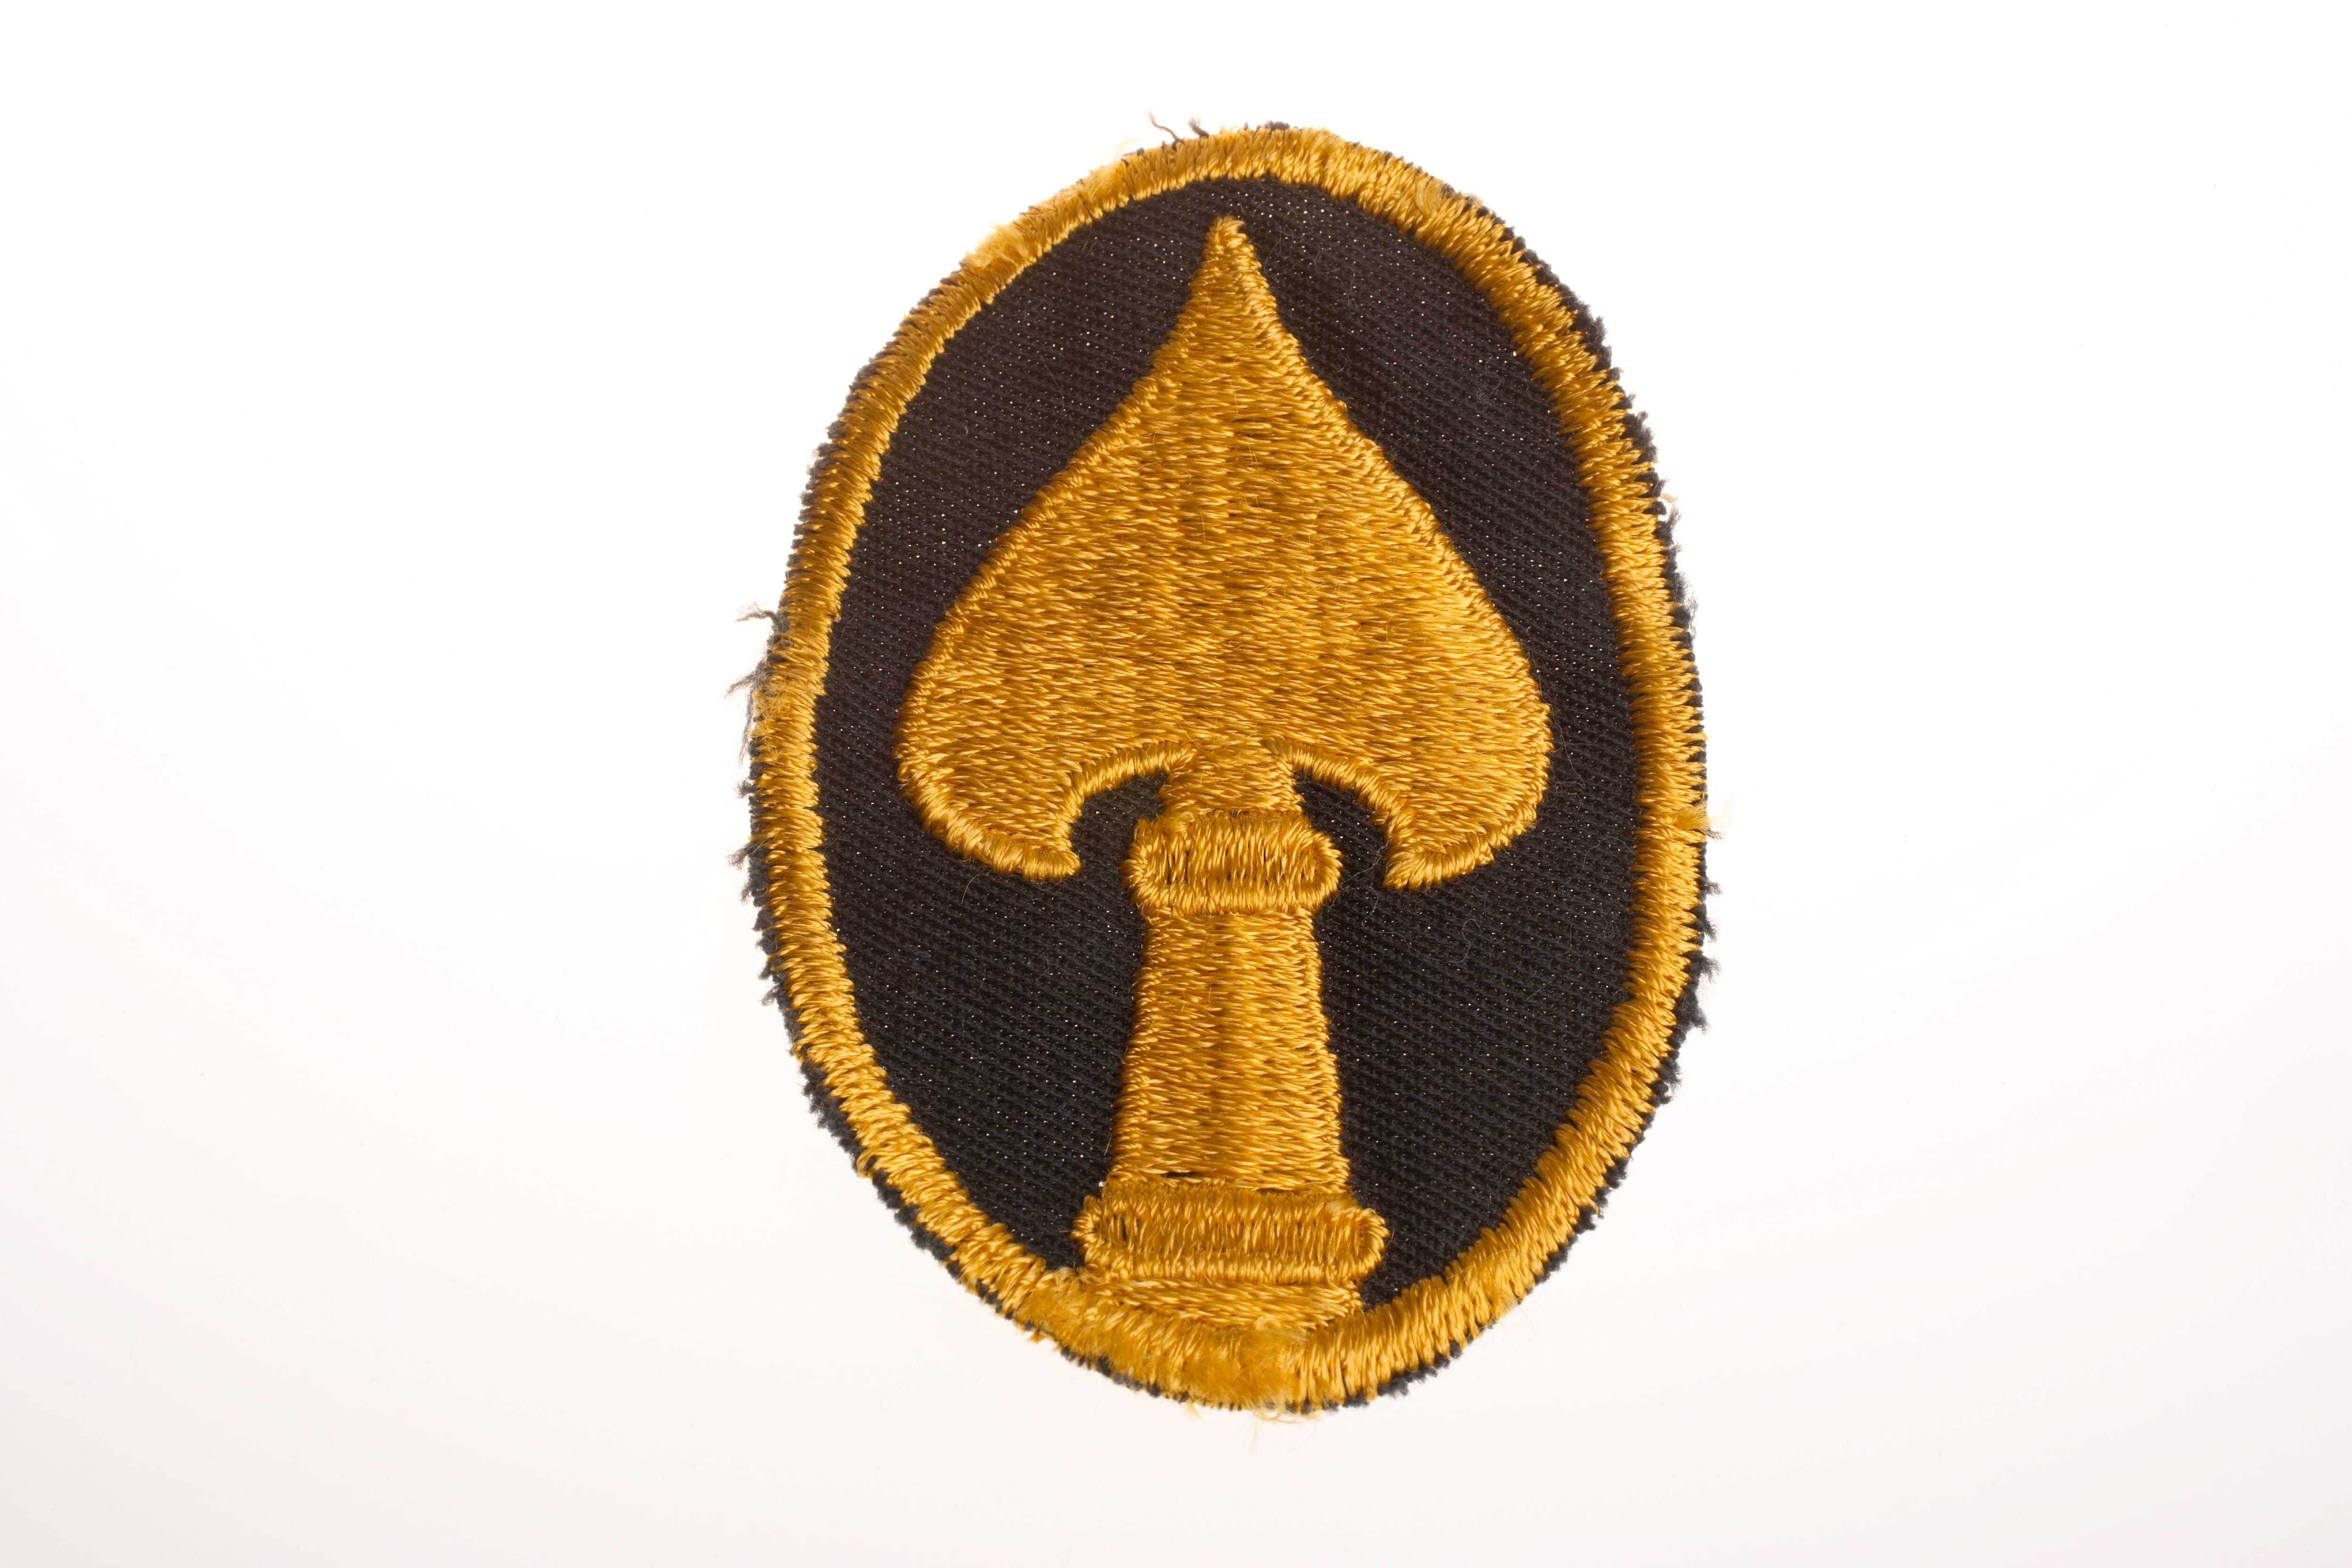 A patch with the OSS insignia, a gold tip of a spear with a black background